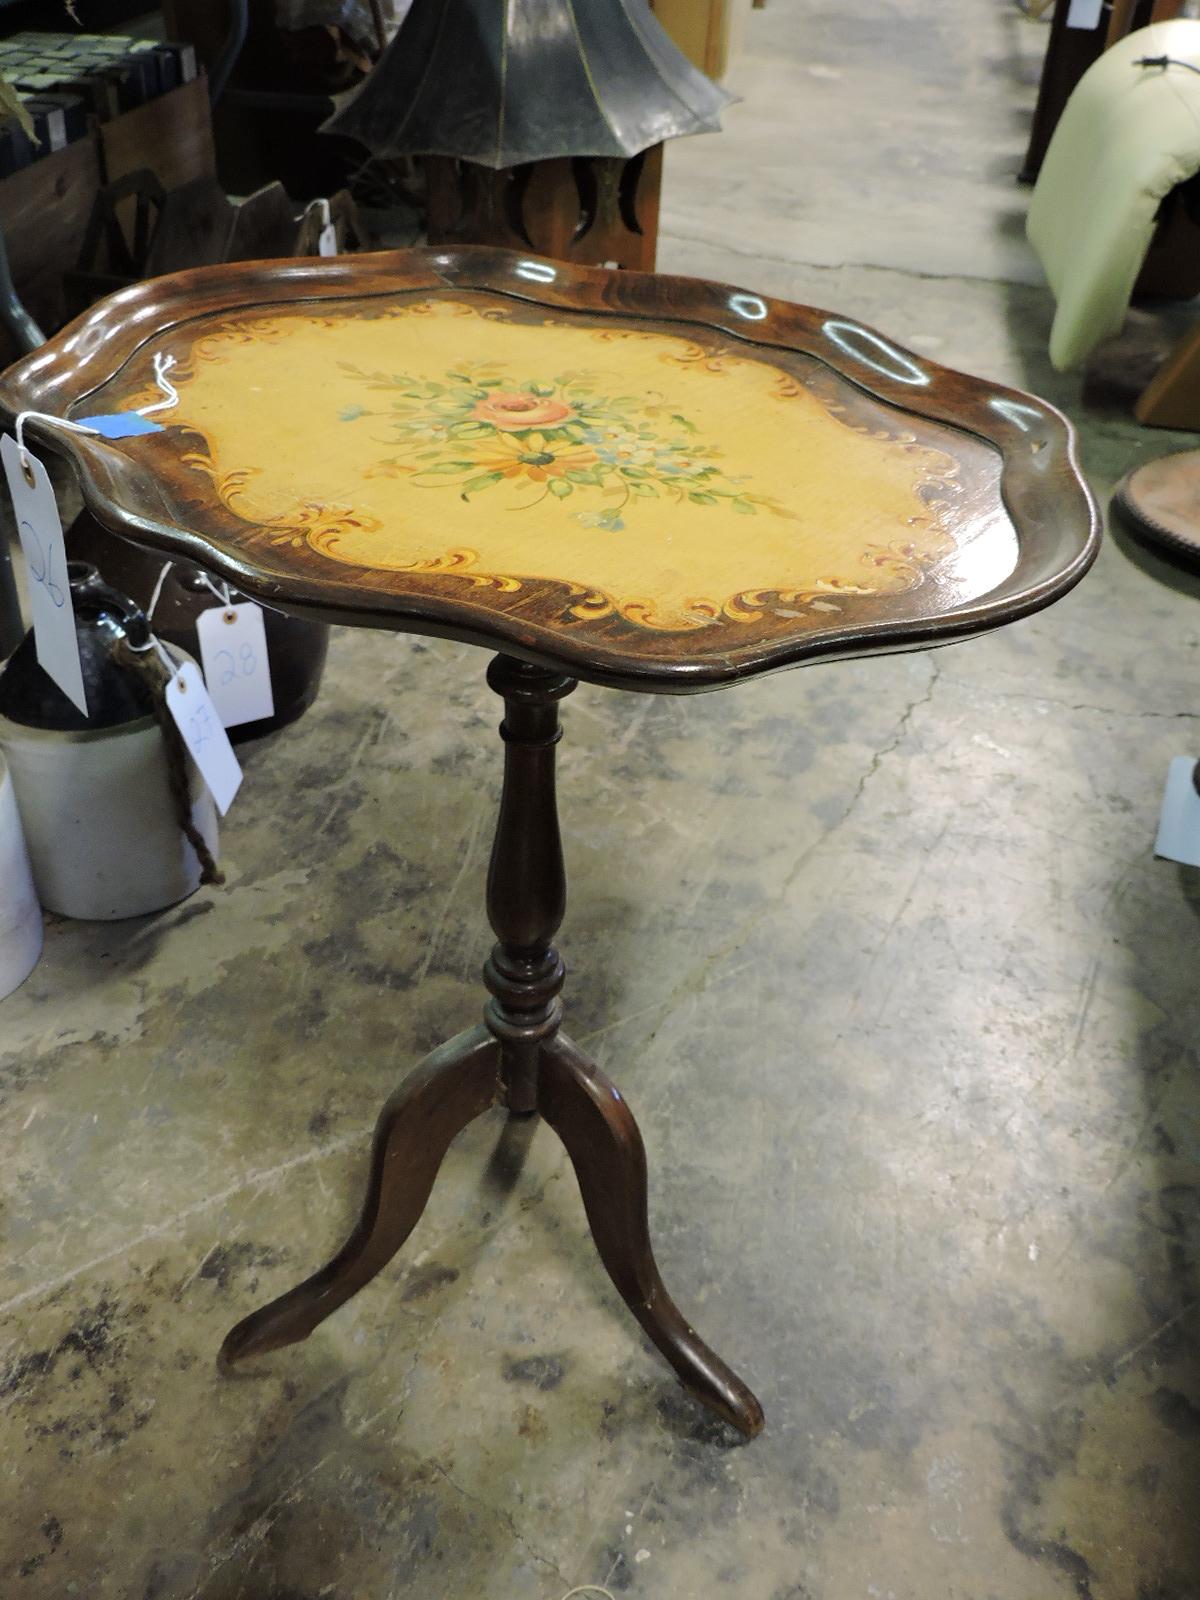 Antique Wooden Pie-Crust Tray Table